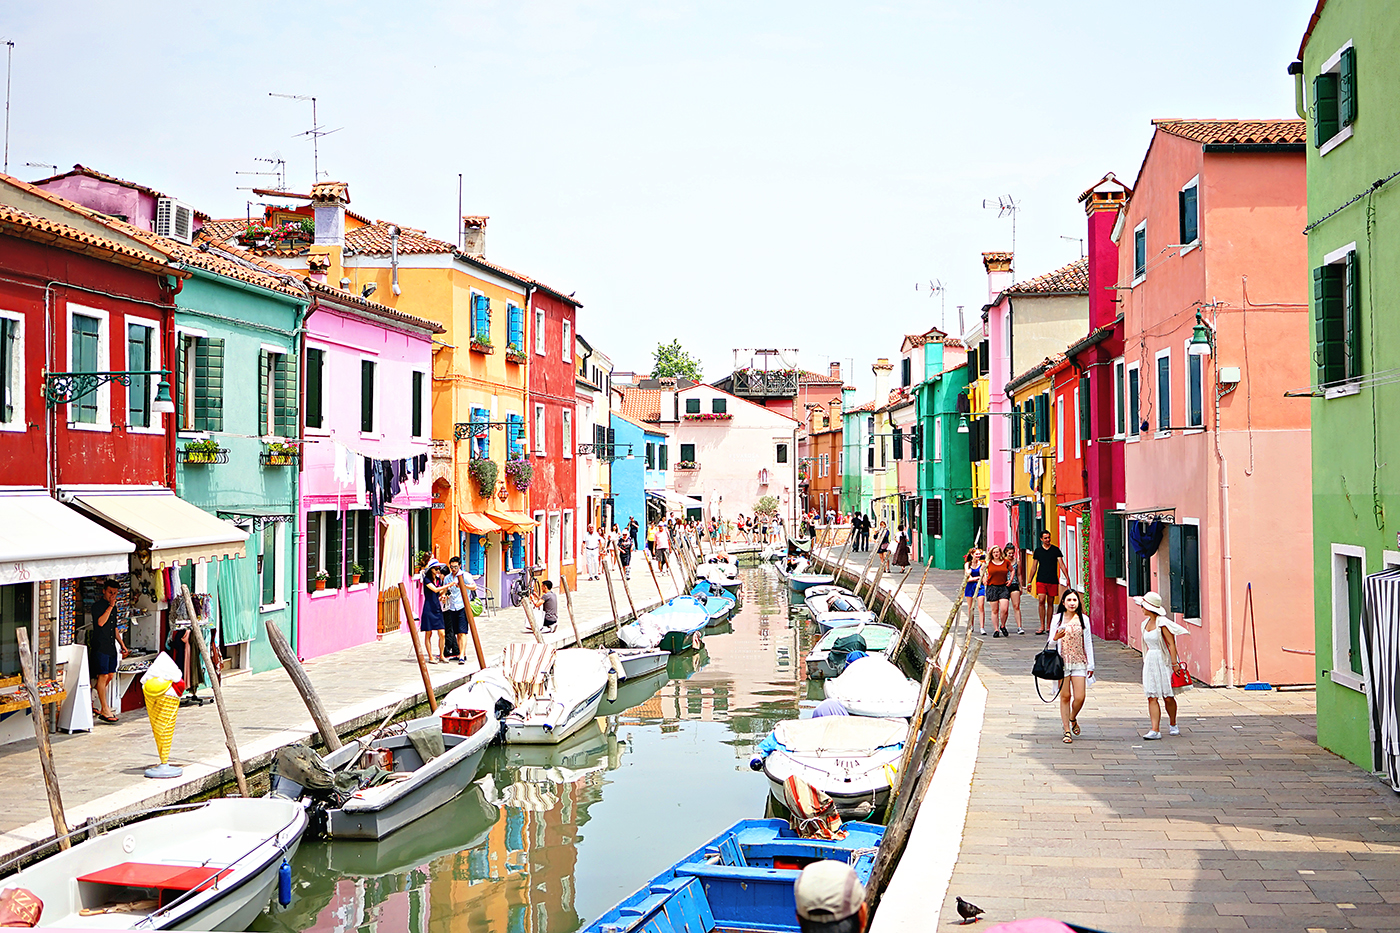 History In High Heels: Colorful Burano, Venice